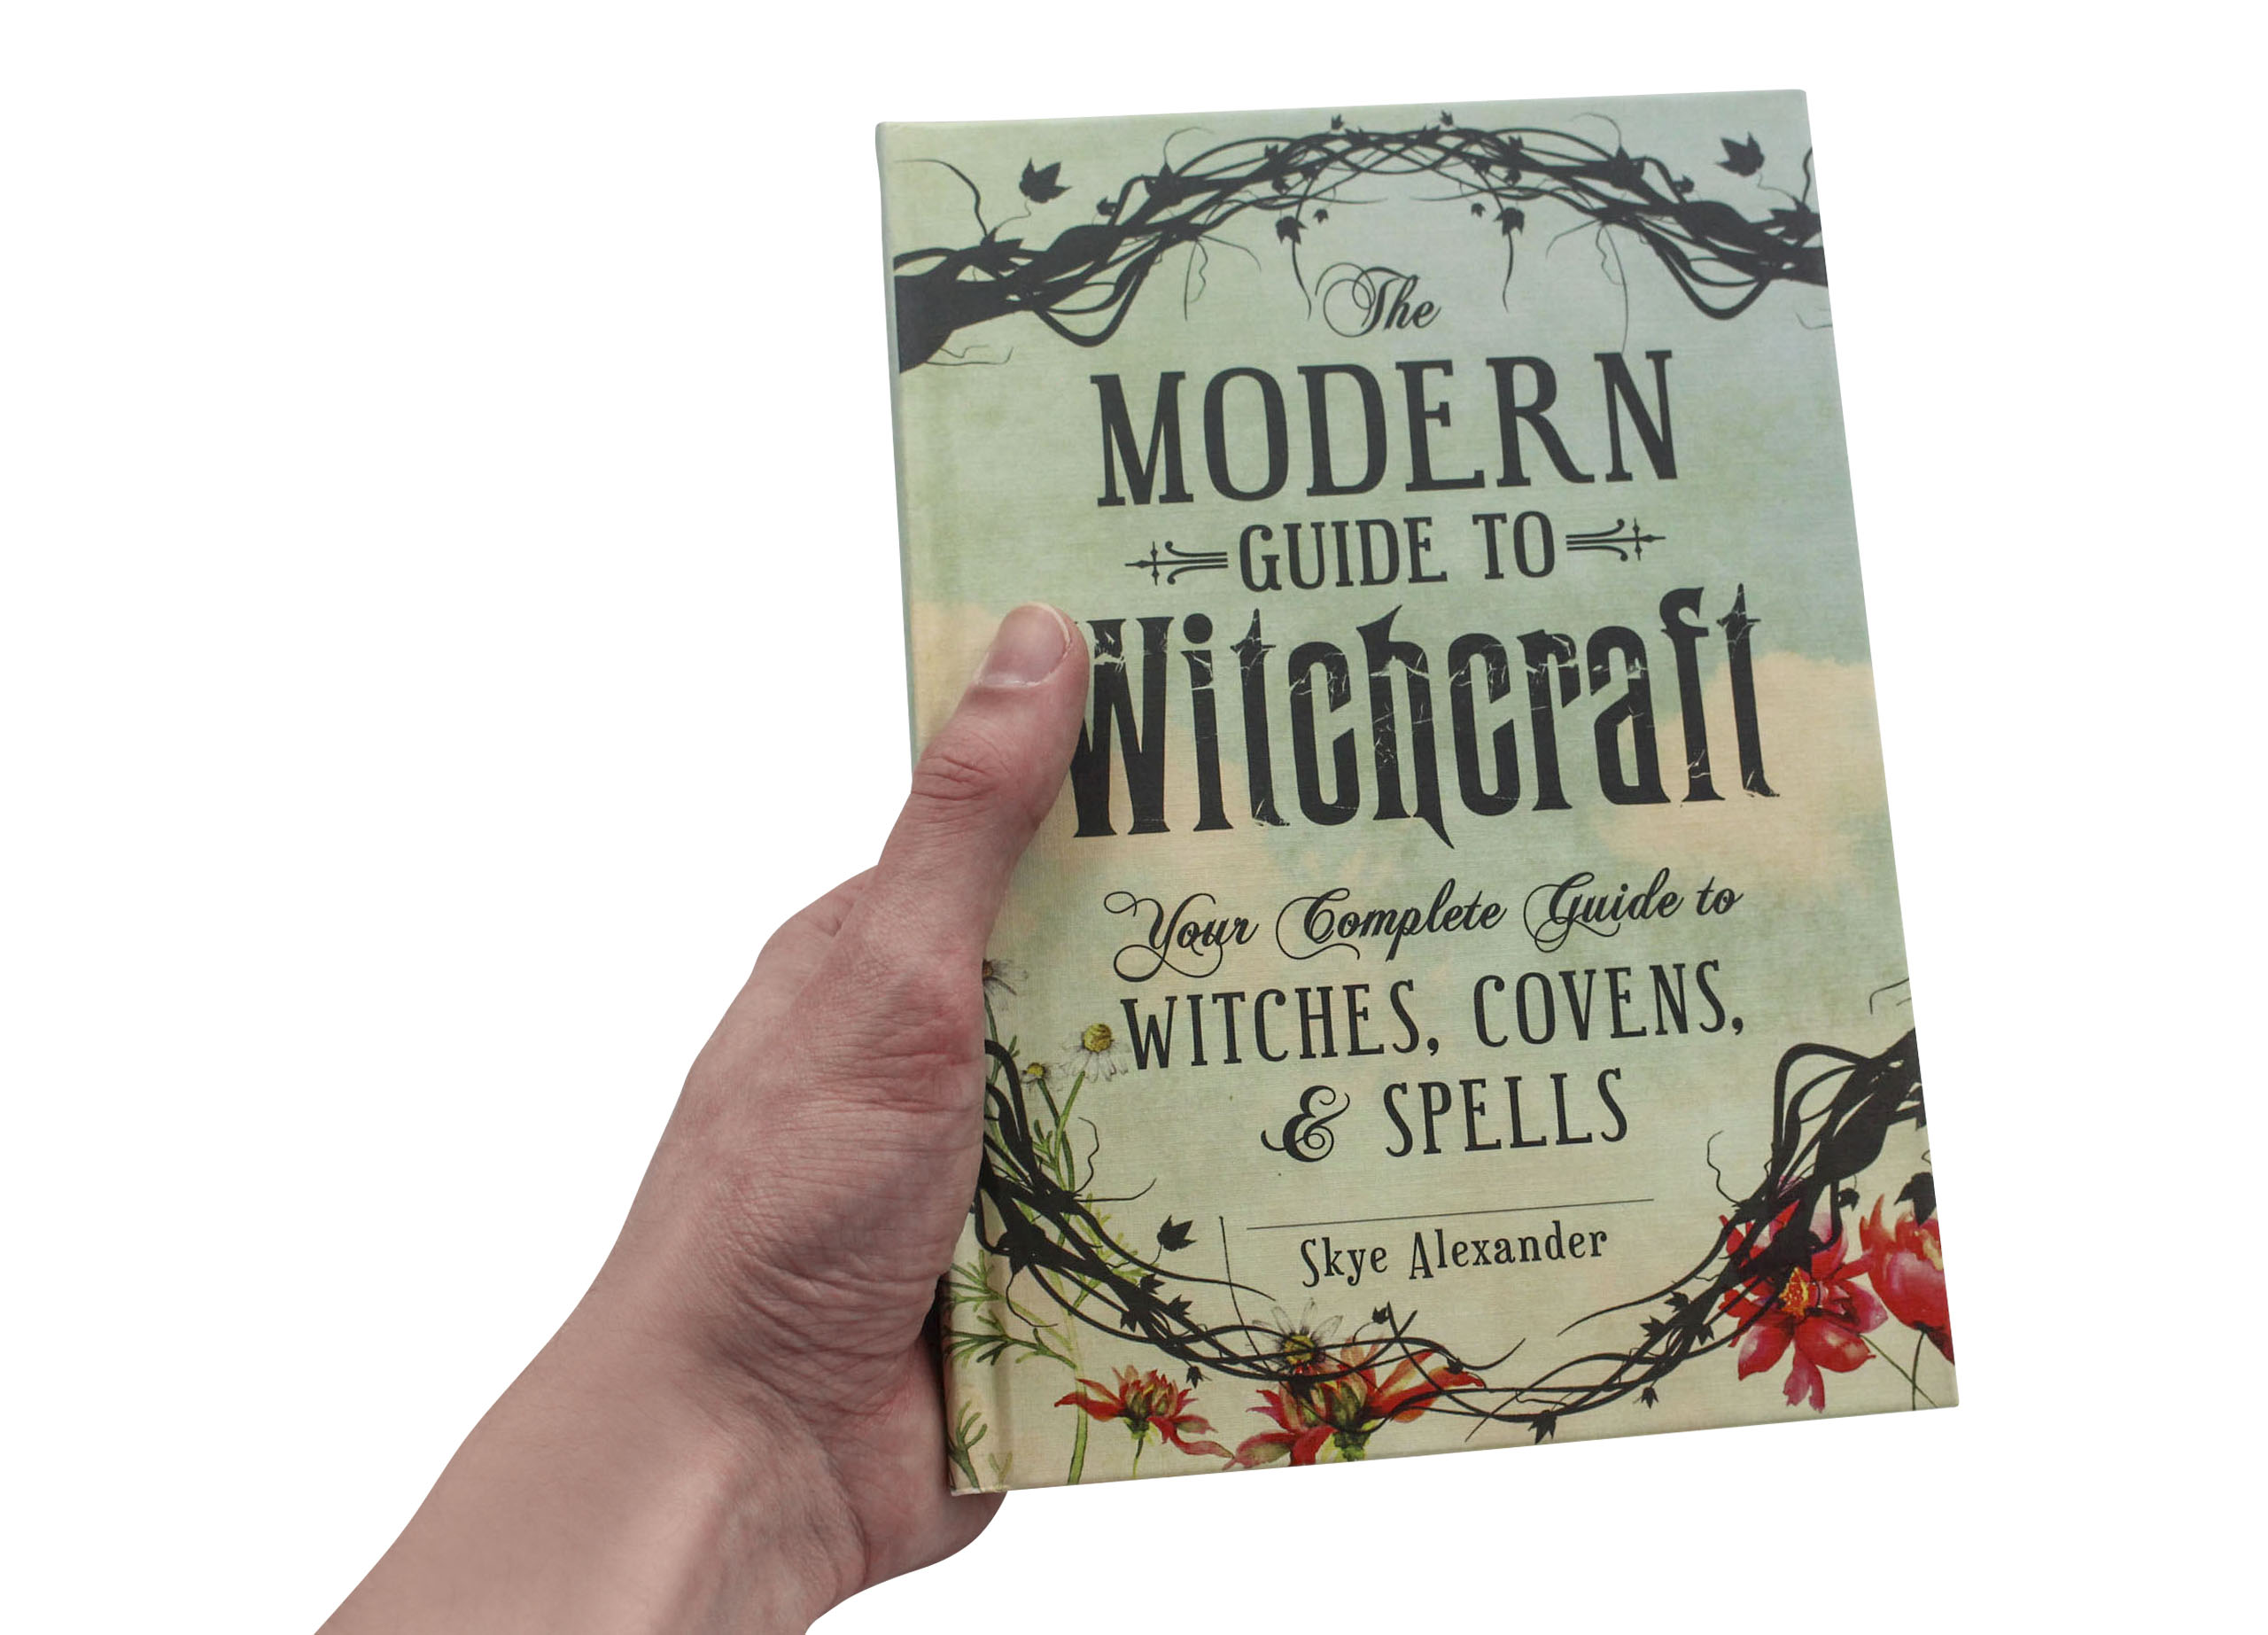 The Modern Guide to Witchcraft - Crystal Dreams